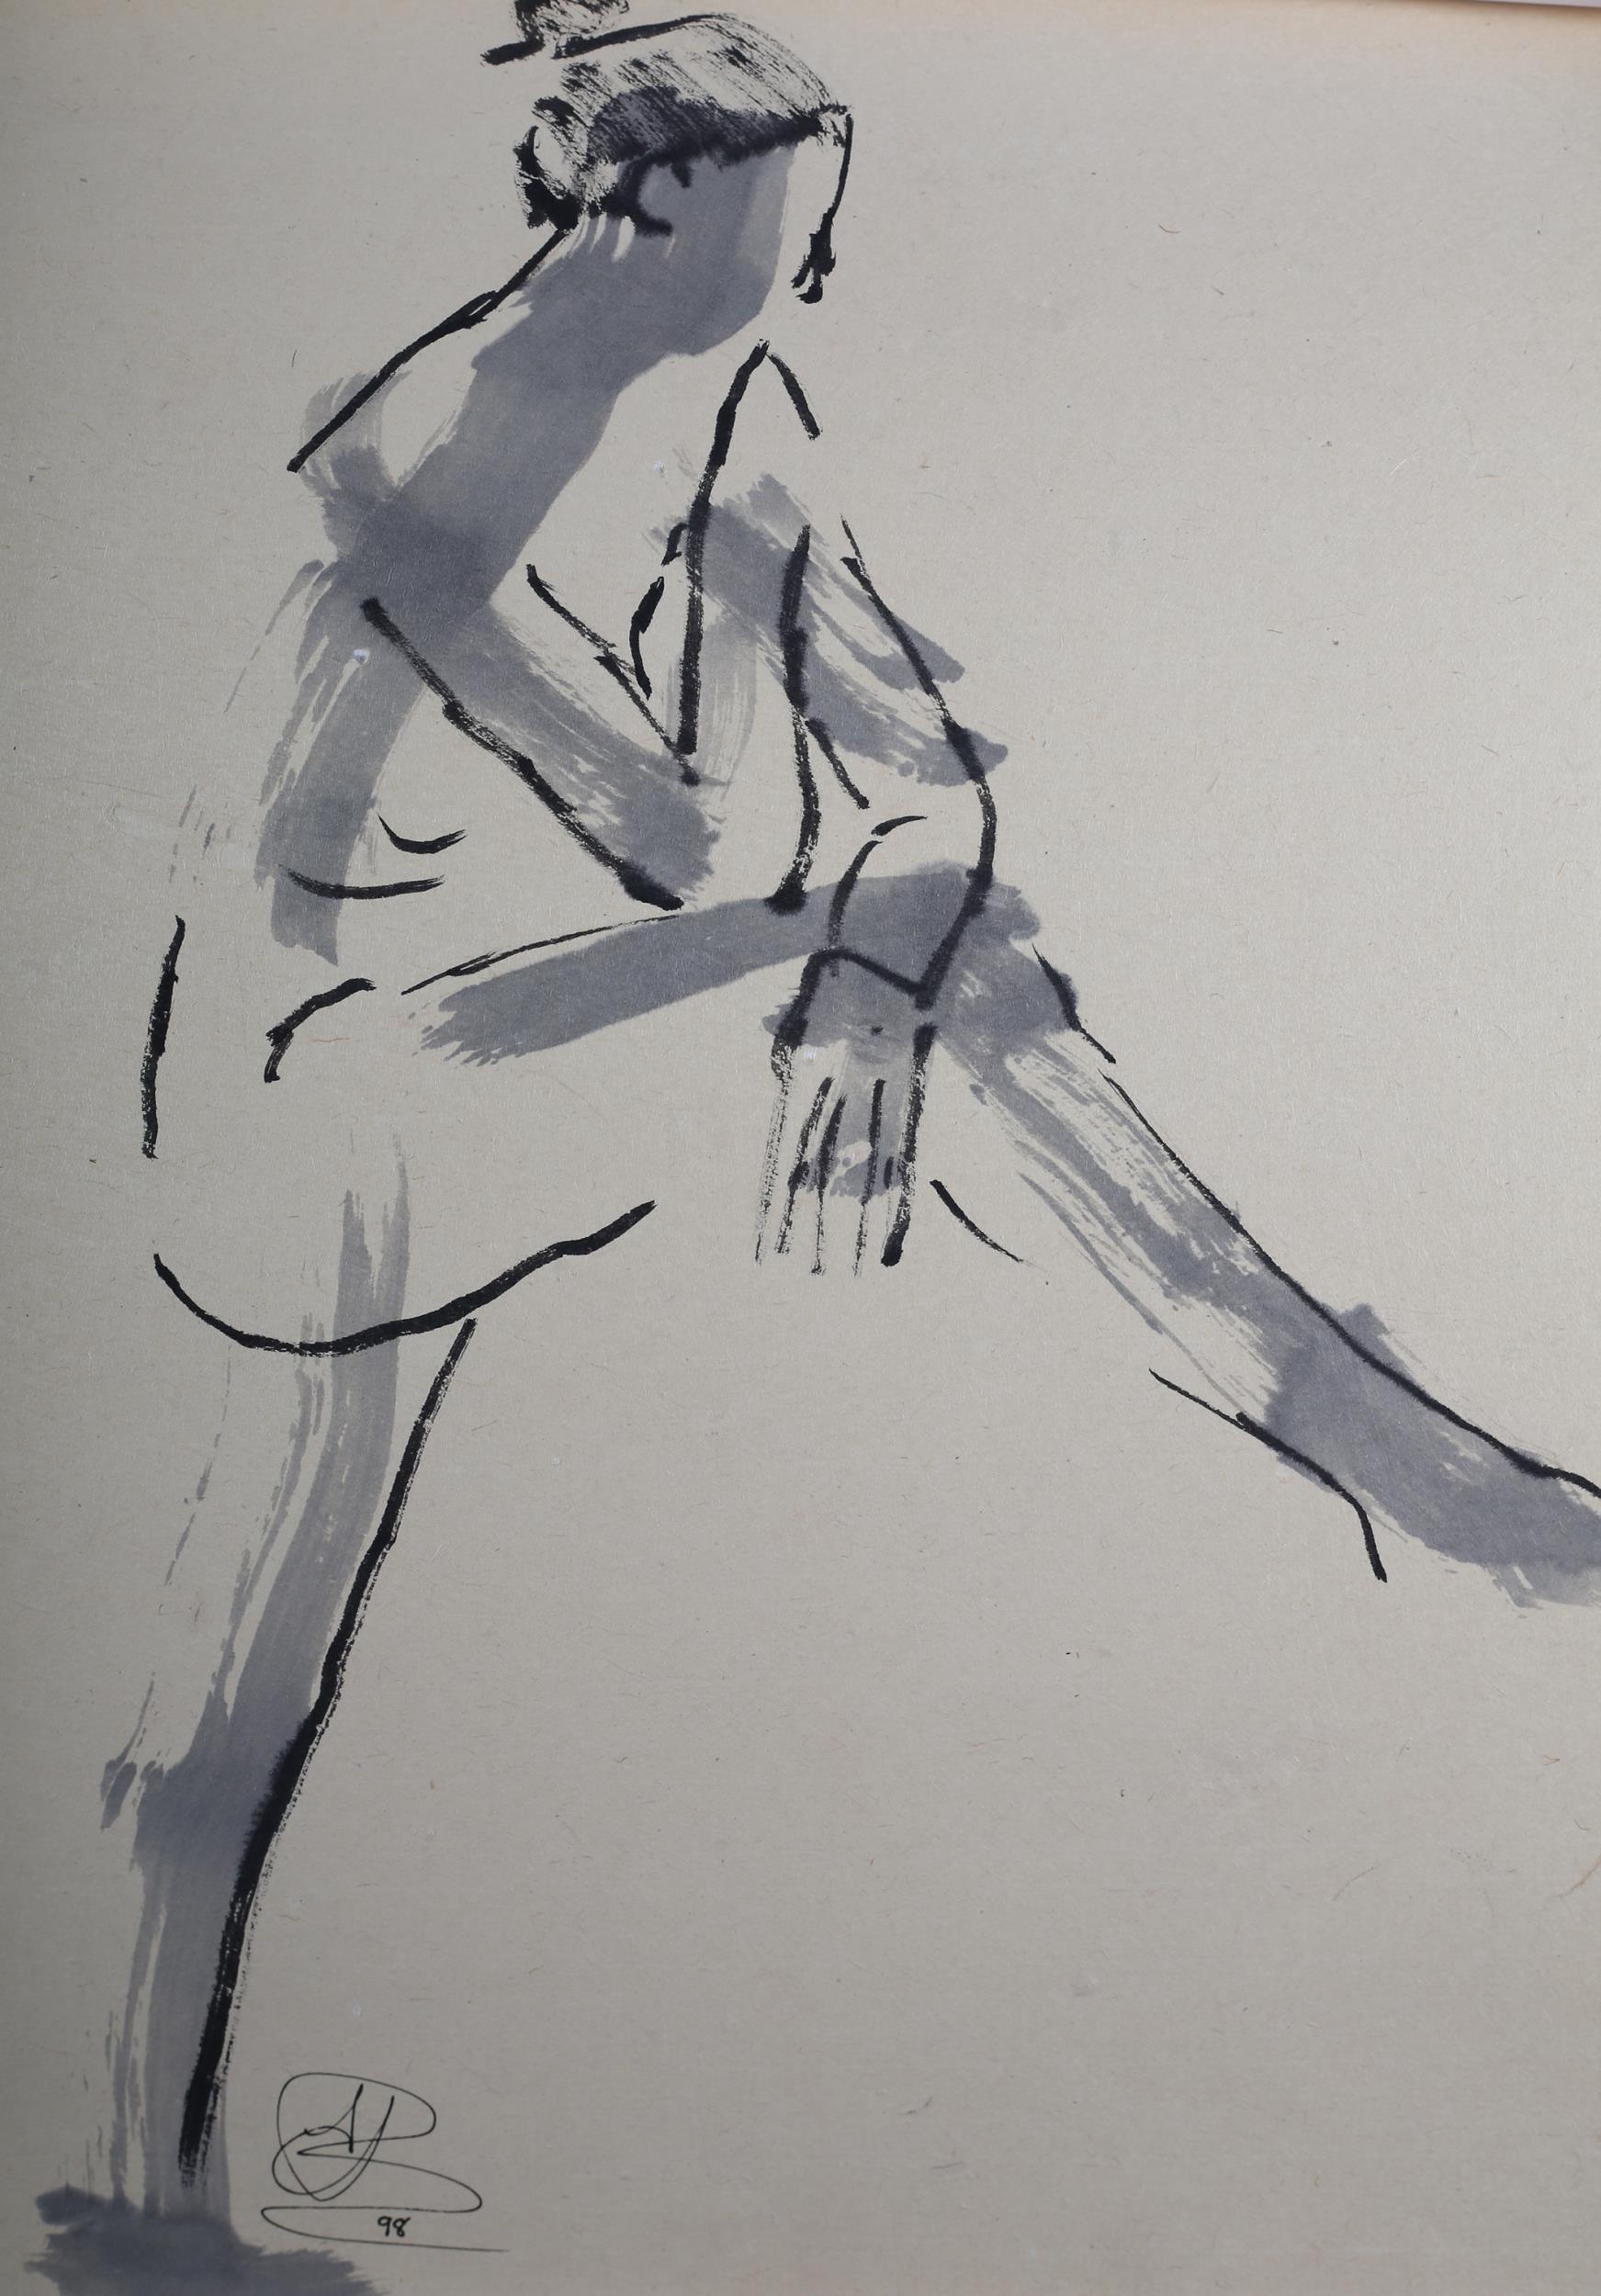 ARR E Bissett (20th/21st century), Nude studies, colour wash, crayon and charcoal, brush and stick - Image 3 of 4